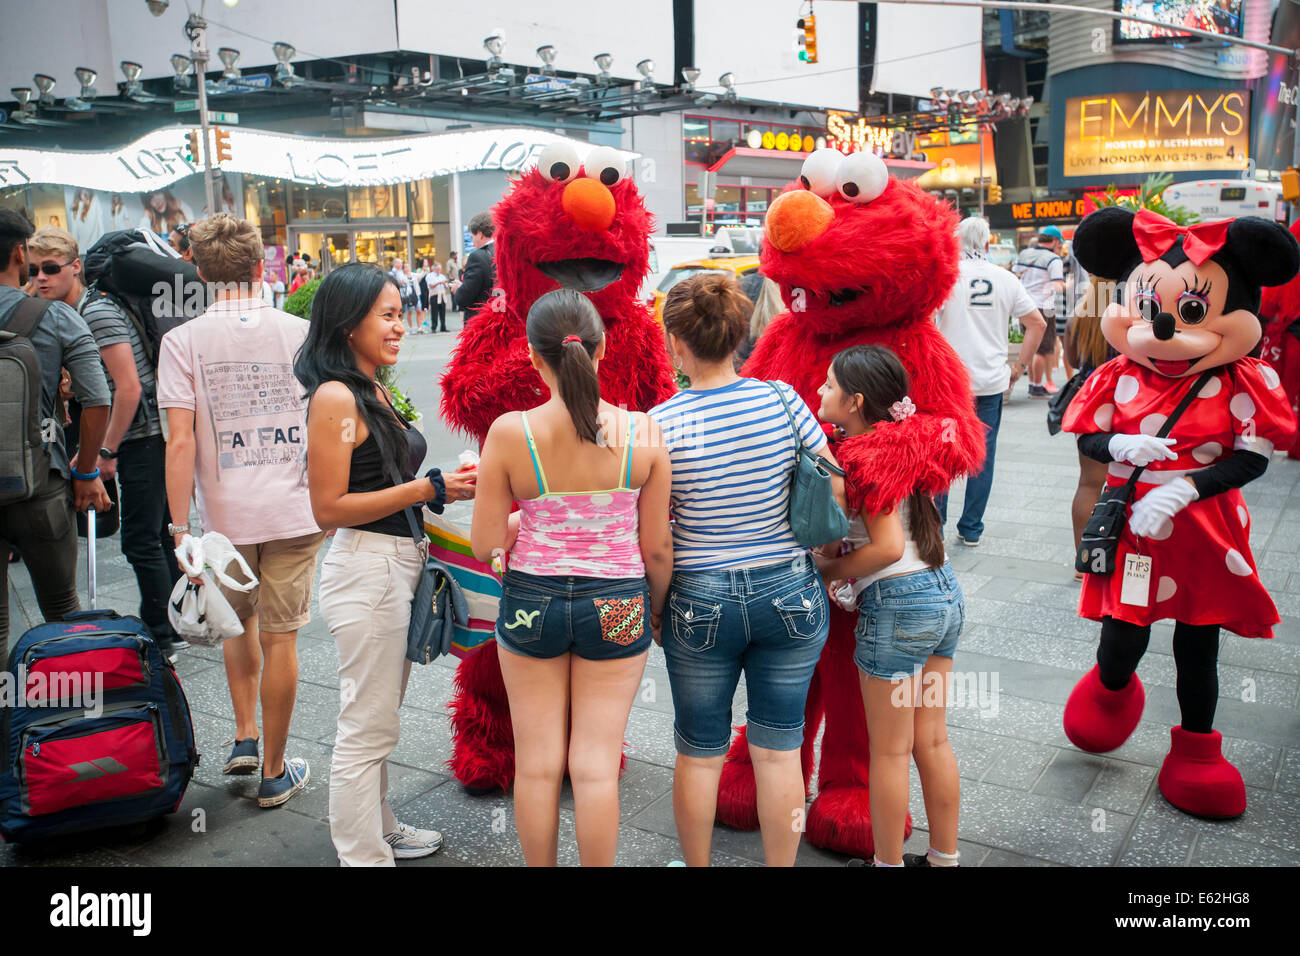 Twin Elmos solicit tips in Times Square in New York as Minnie Mouse trolls for tips. Stock Photo